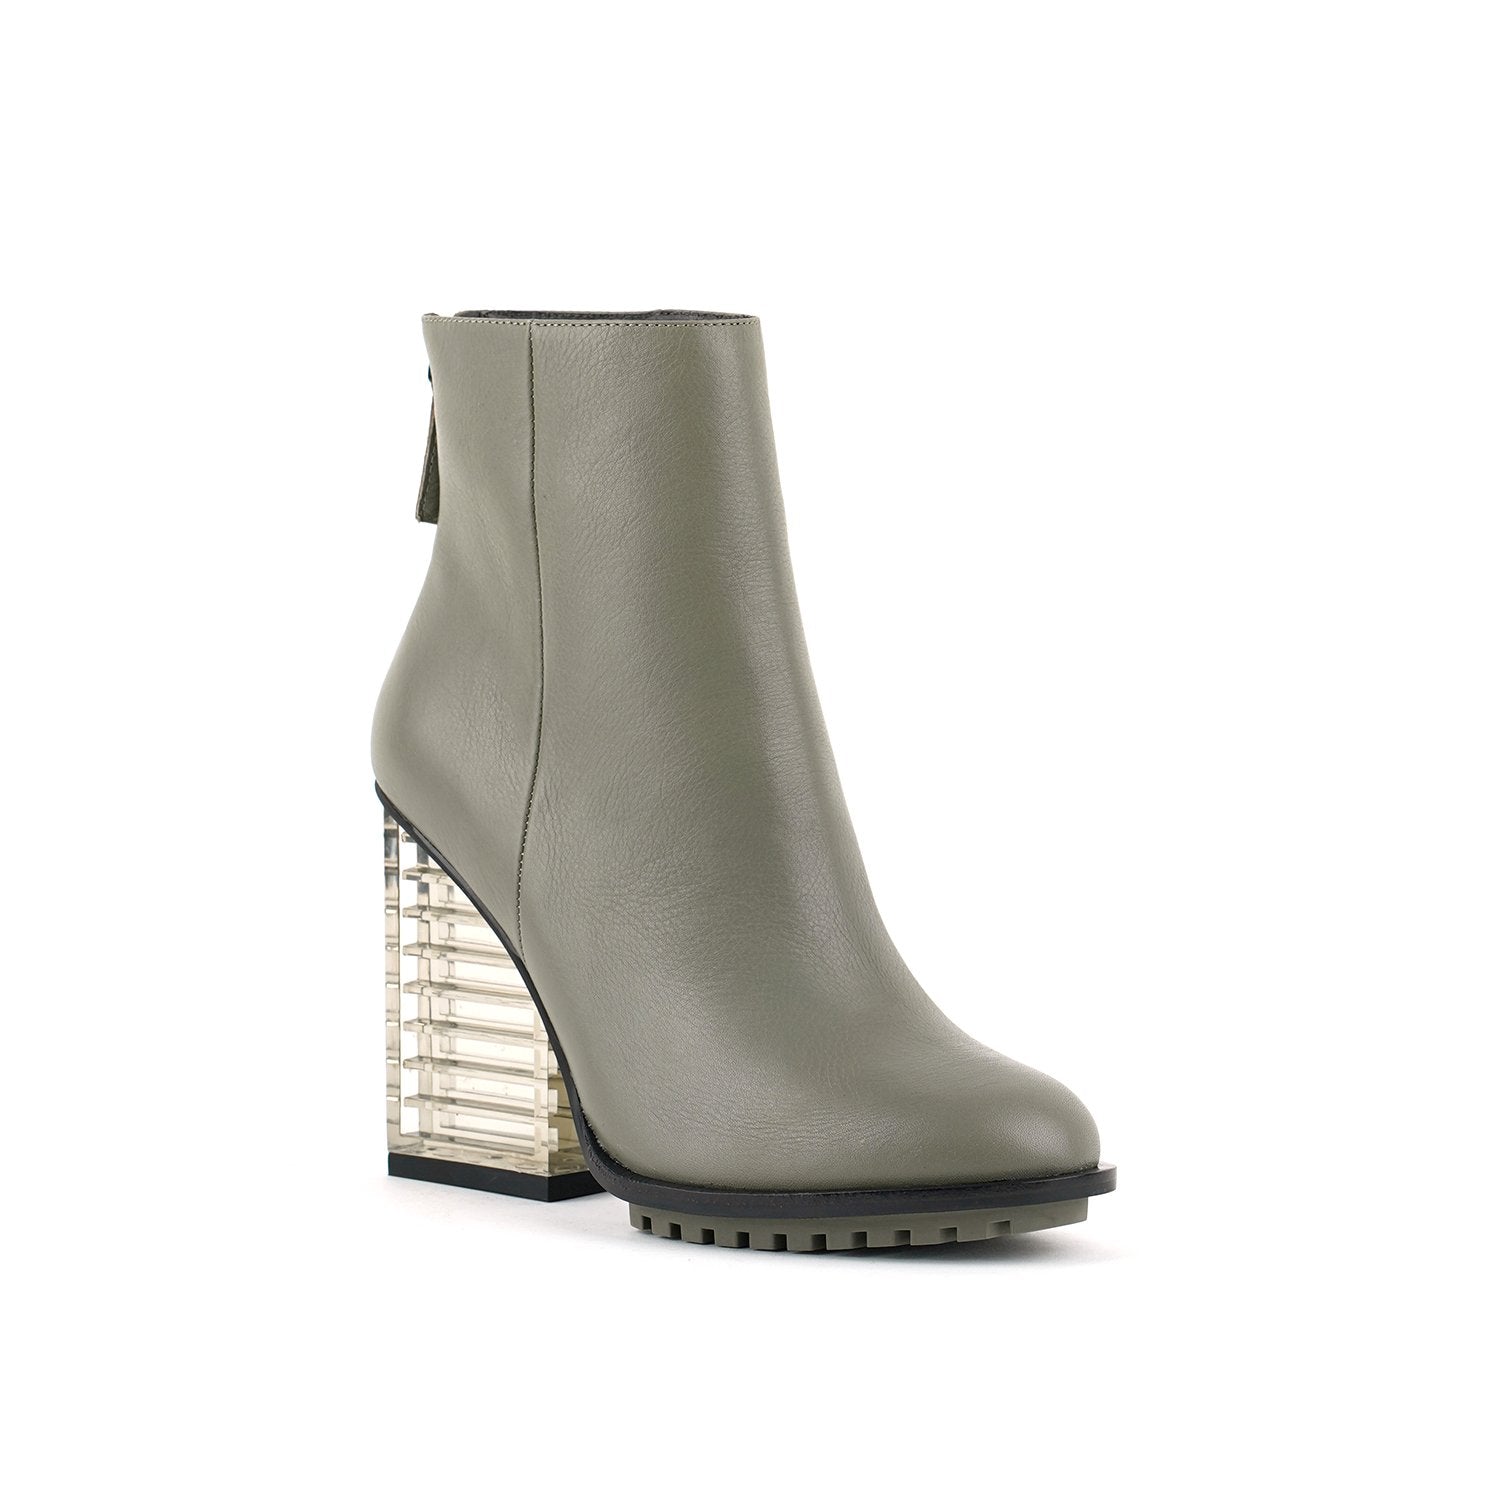 Outer side front view of the united nude hi rise bootie. This bootie is grey with a glass like see-through, block shaped high heel. The bootie is an ankle bootie with a back zipper.